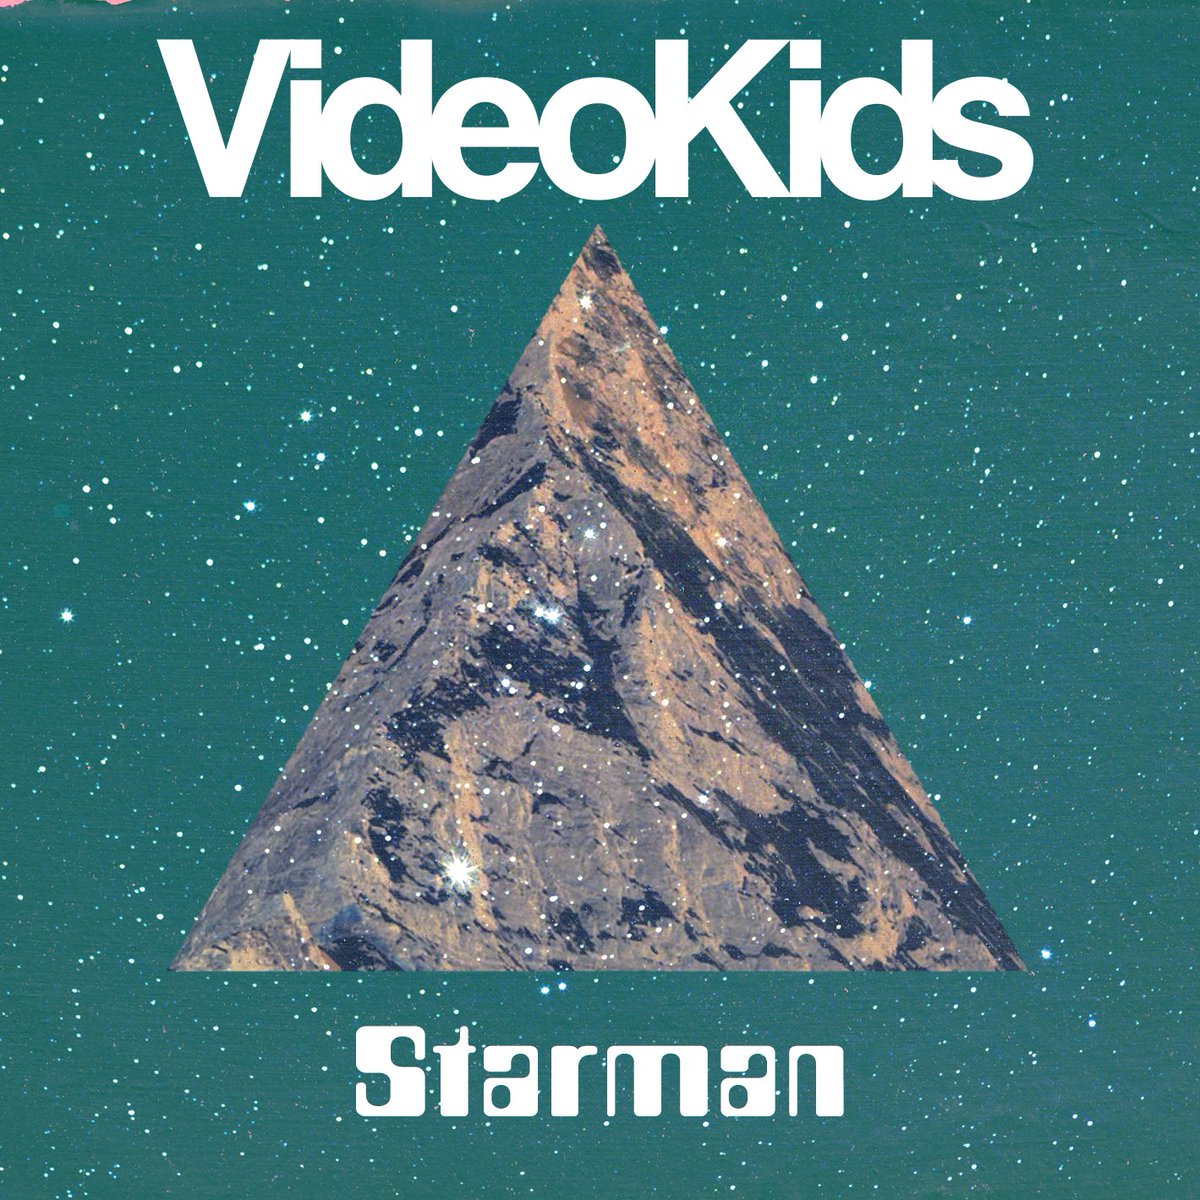 Our new single 'Starman' is available now at videokids.bandcamp.com!